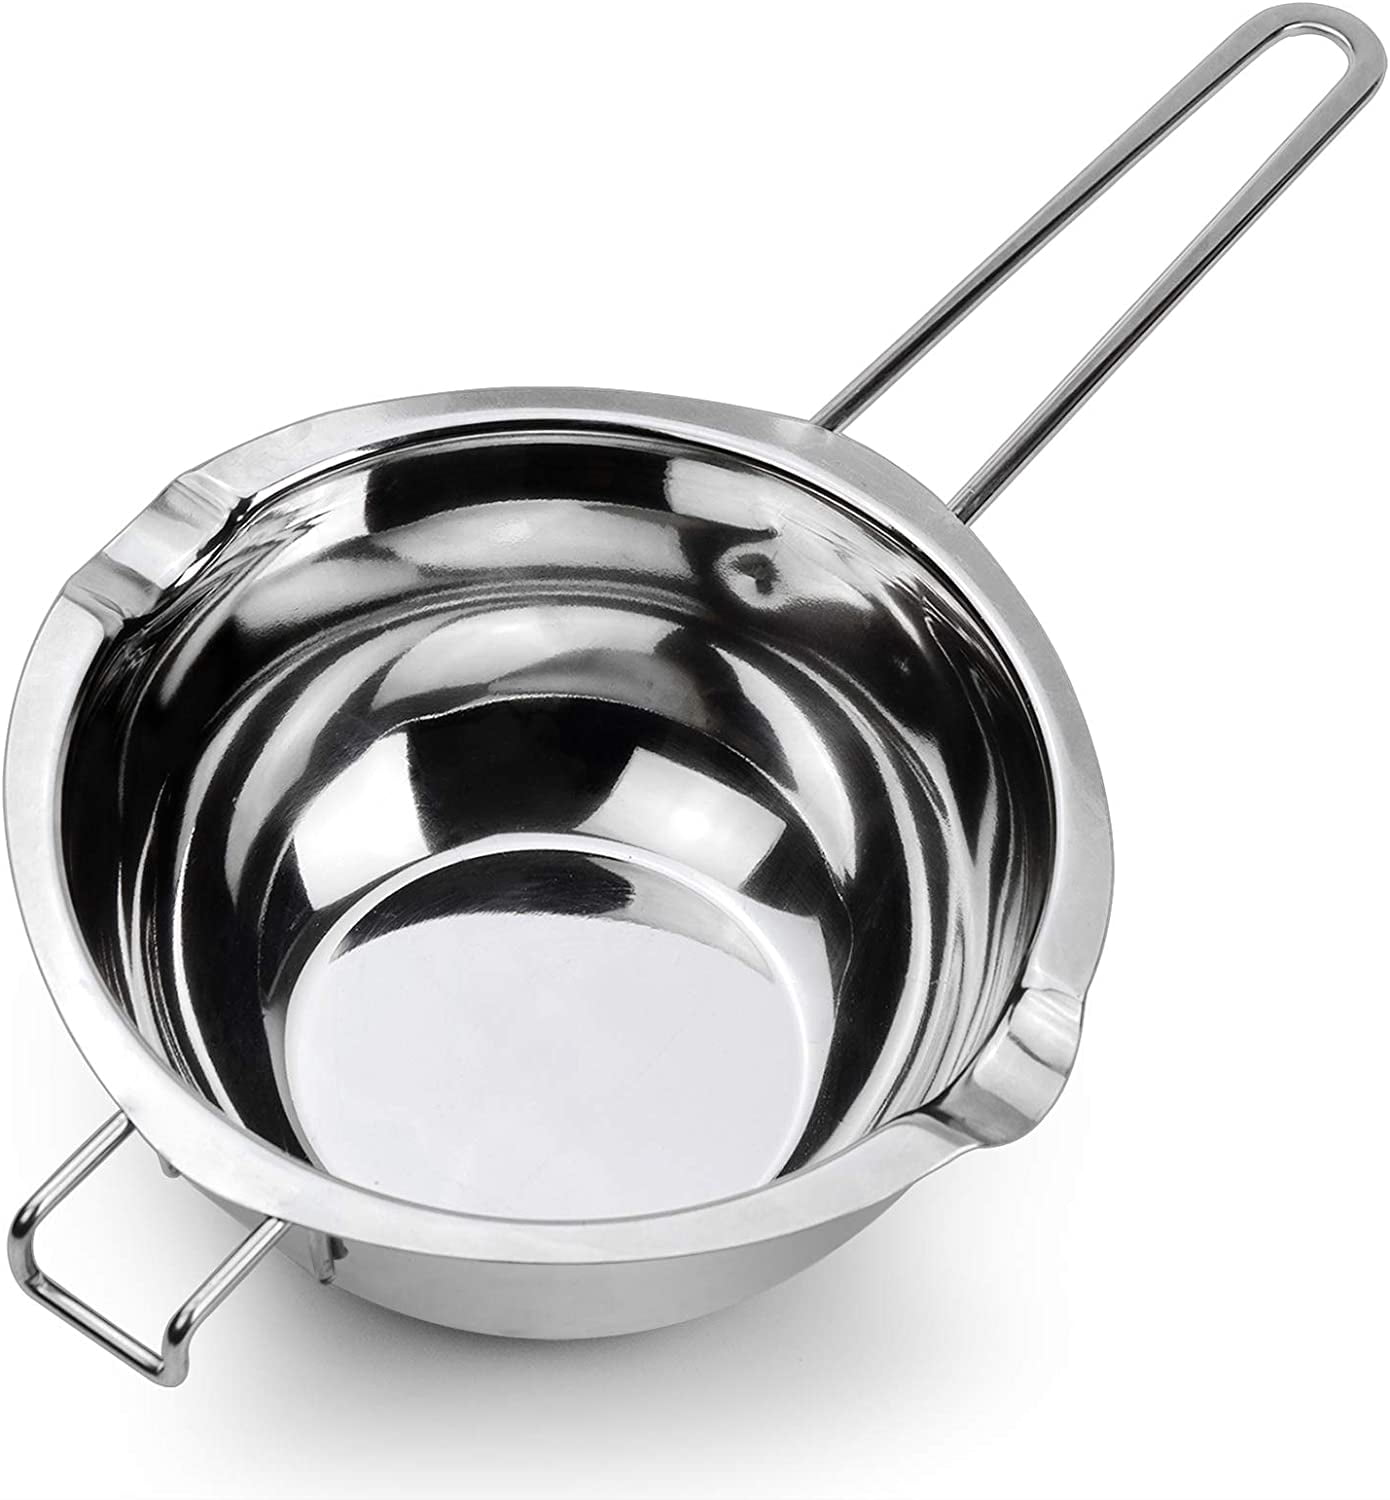  Stainless Steel Double Boiler Pot with Heat Resistant Handle  for Melting Chocolate, Candy and Candle Making (18/8 Steel, 20oz, Universal  Insert): Home & Kitchen